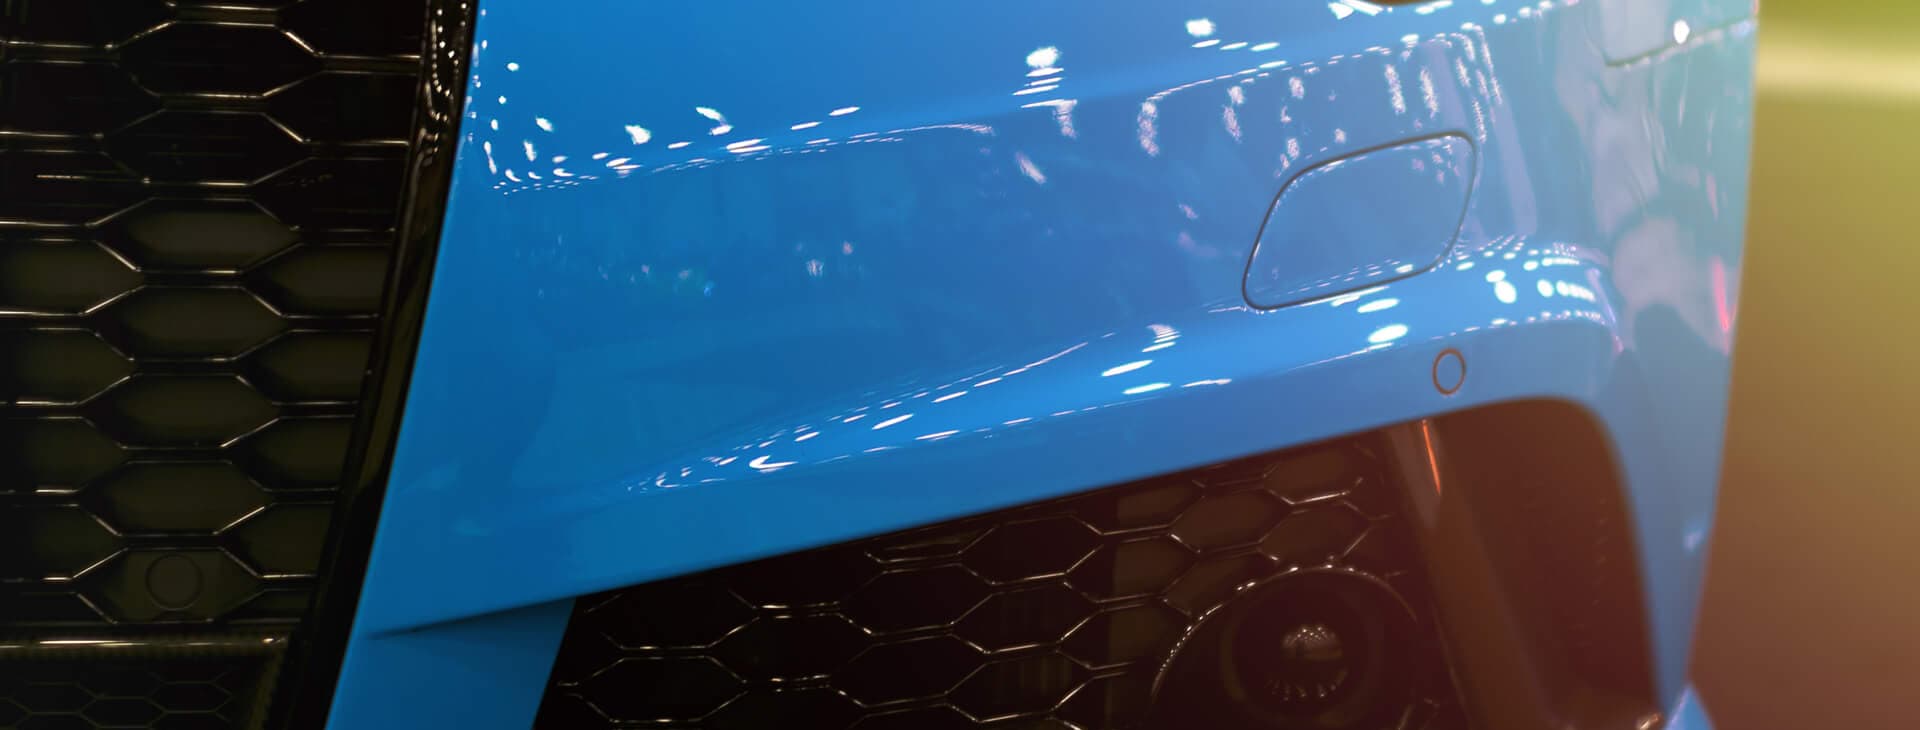 front bumper of a blue sports car with a black headlight and spoiler for automotive markets and applications